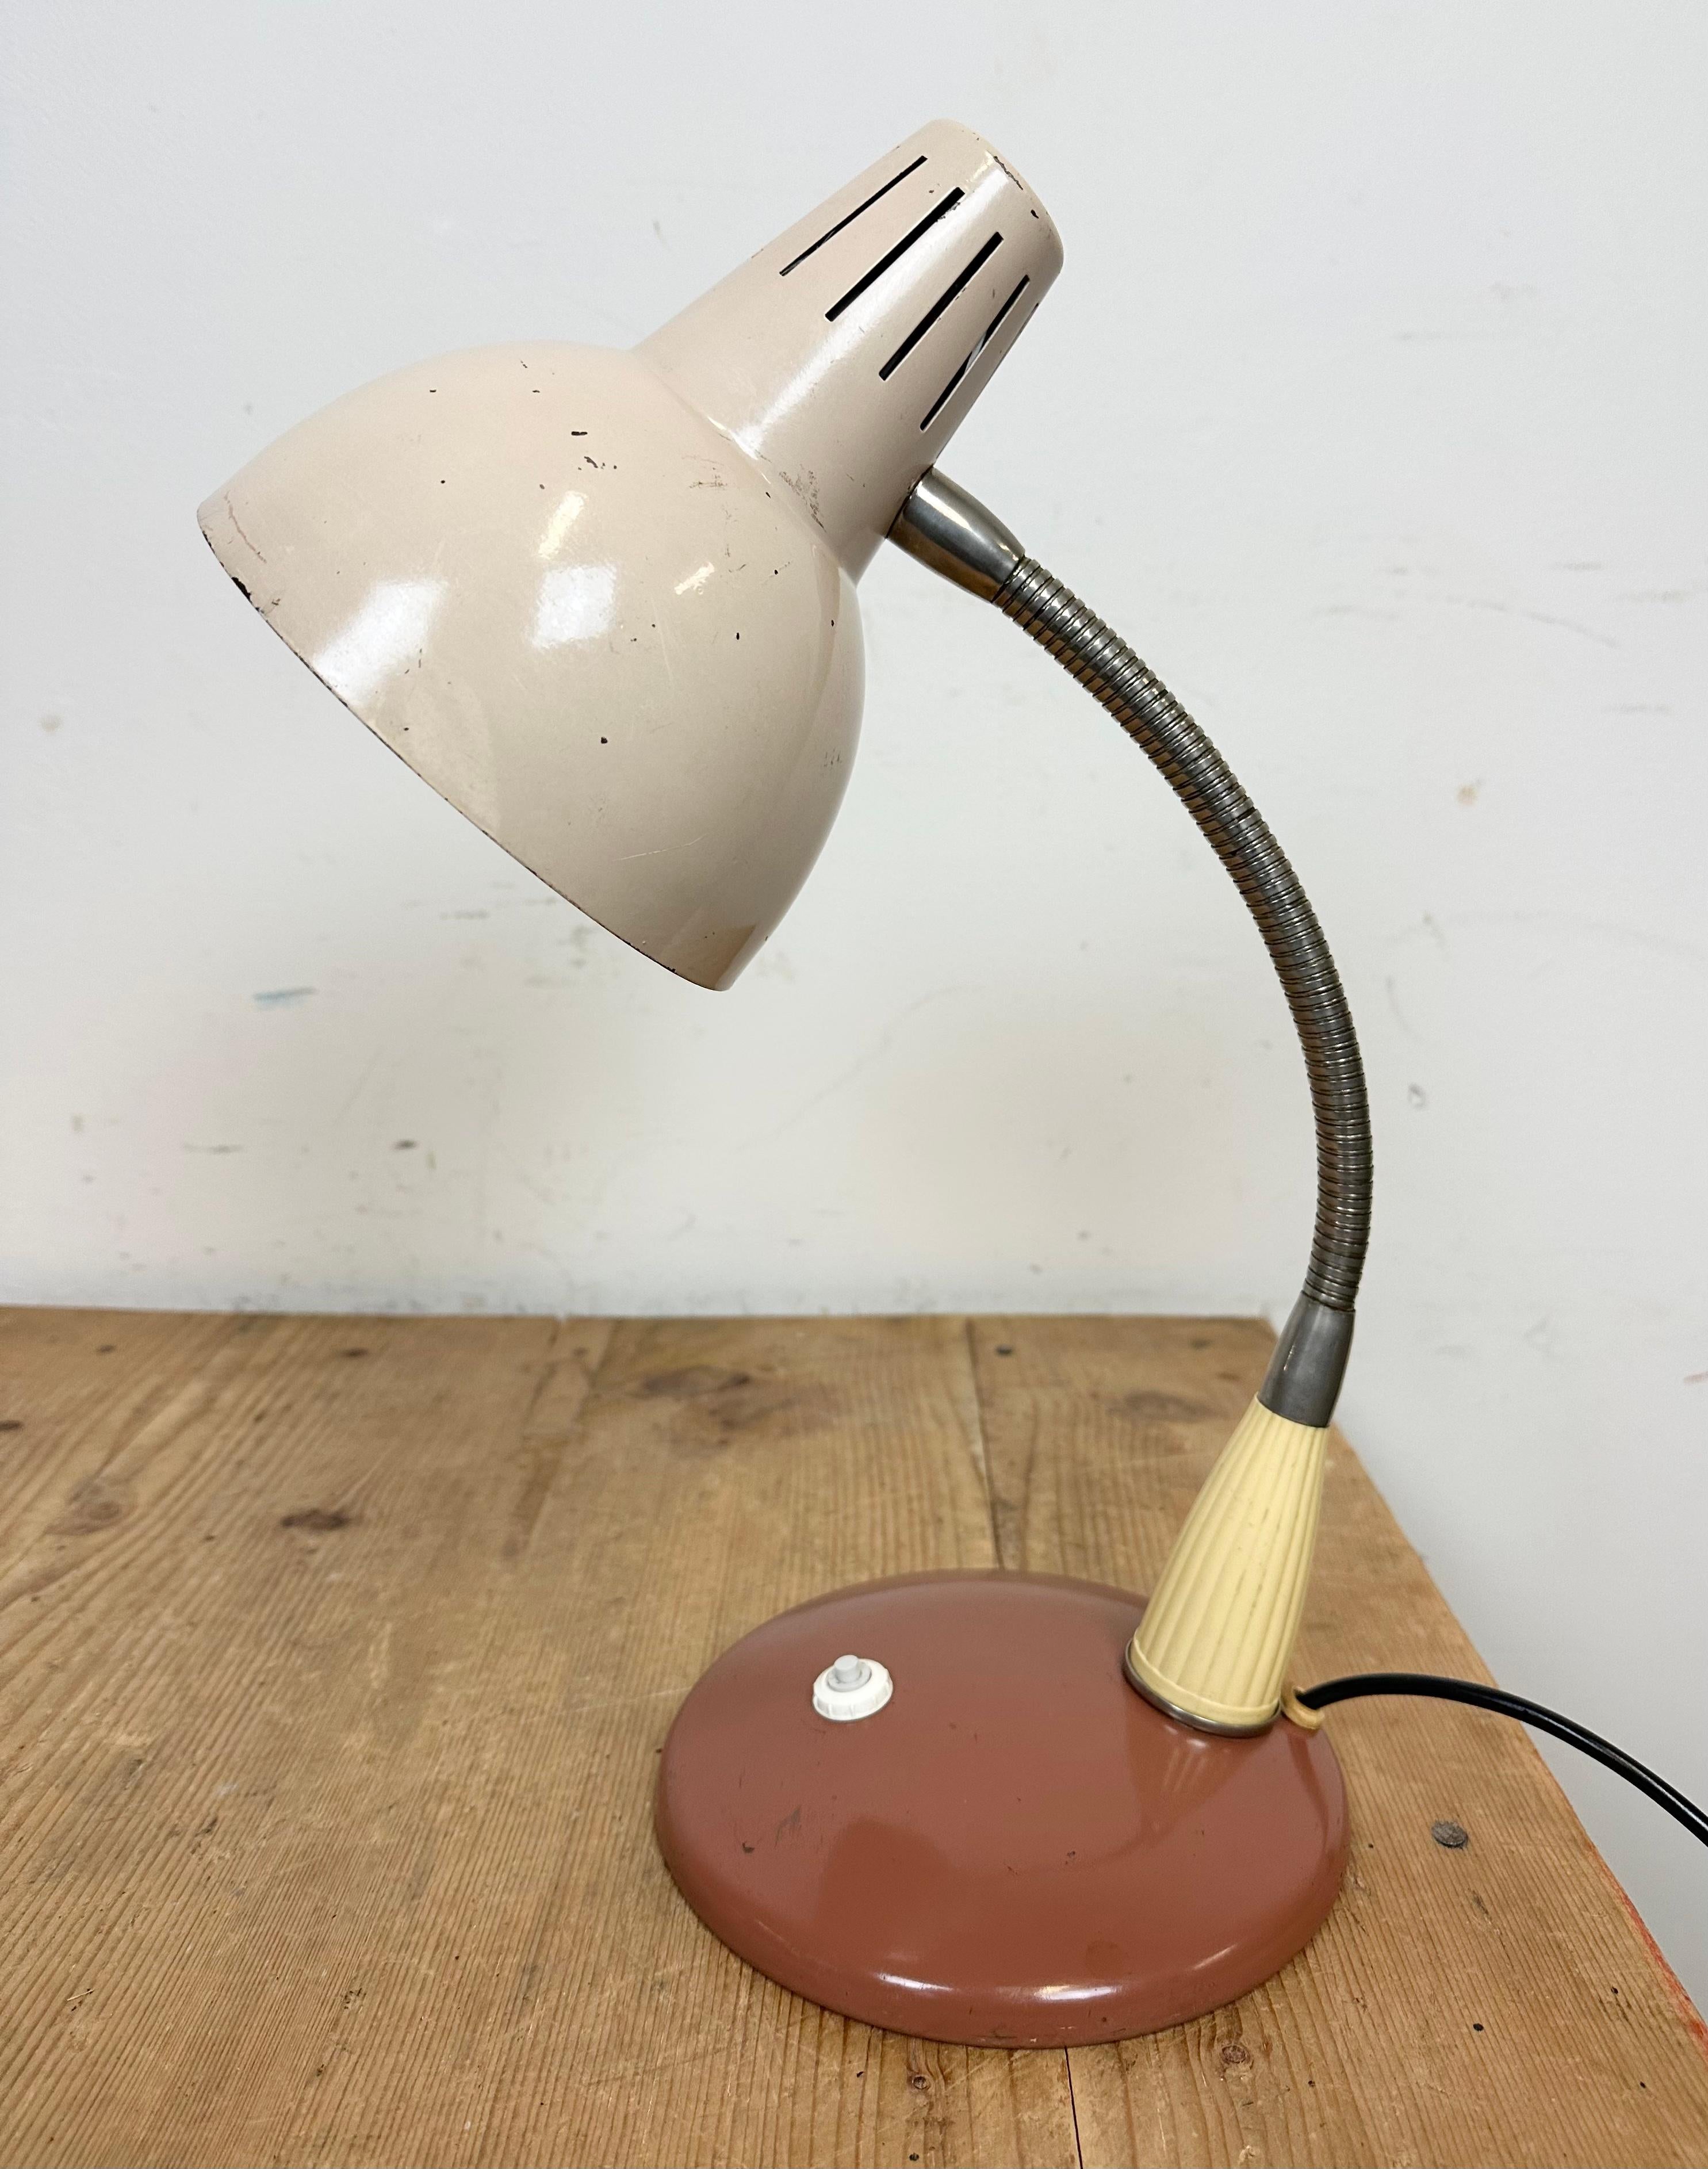 Industrial workshop table lamp made in Poland during the 1960s. It features a metal base and shade and a chrome plated gooseneck. The porcelain socket requires E27/E26 lightbulbs.
The diameter of the shade is 15 cm. fully functional.